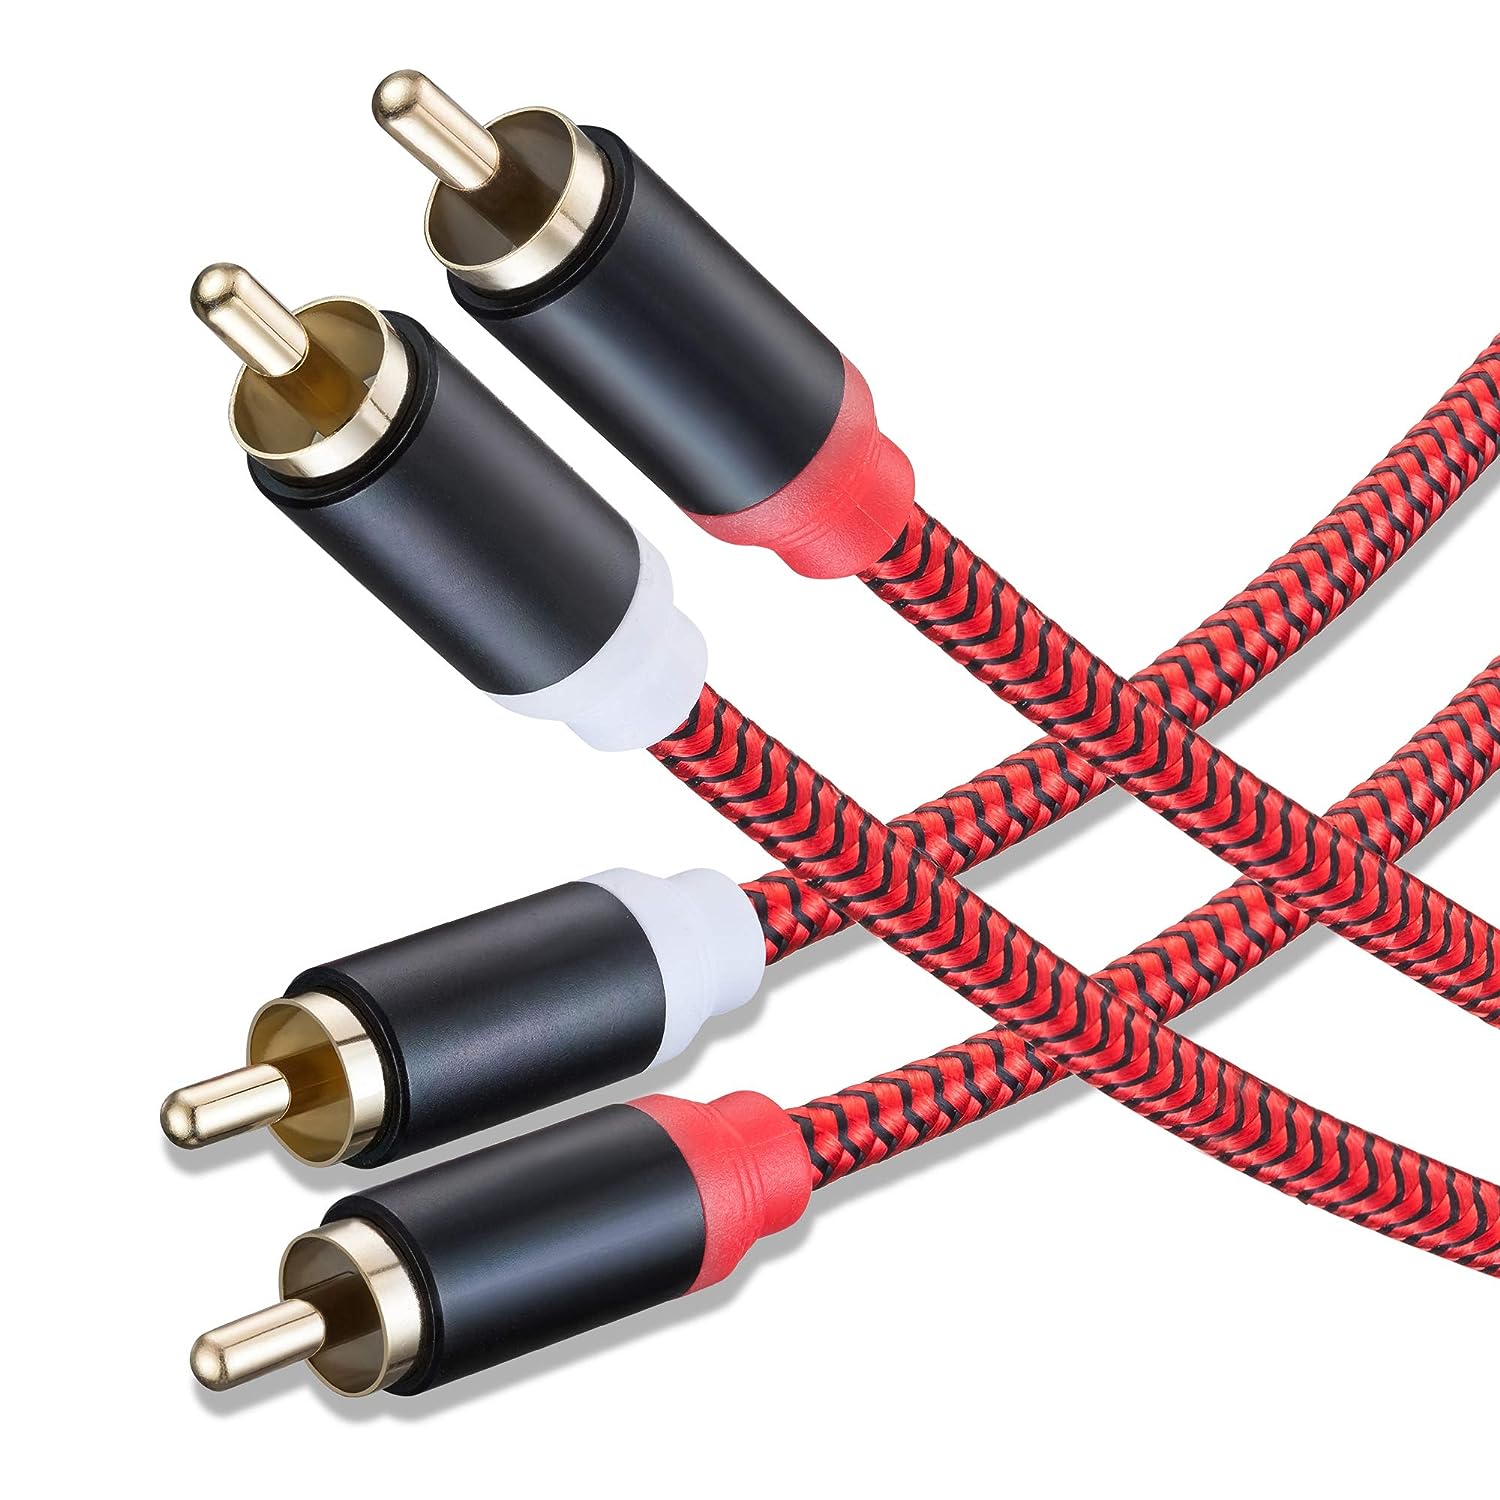 RCA Cable 15Ft,2Rca Male to 2-Rca Male Audio Stereo [...]